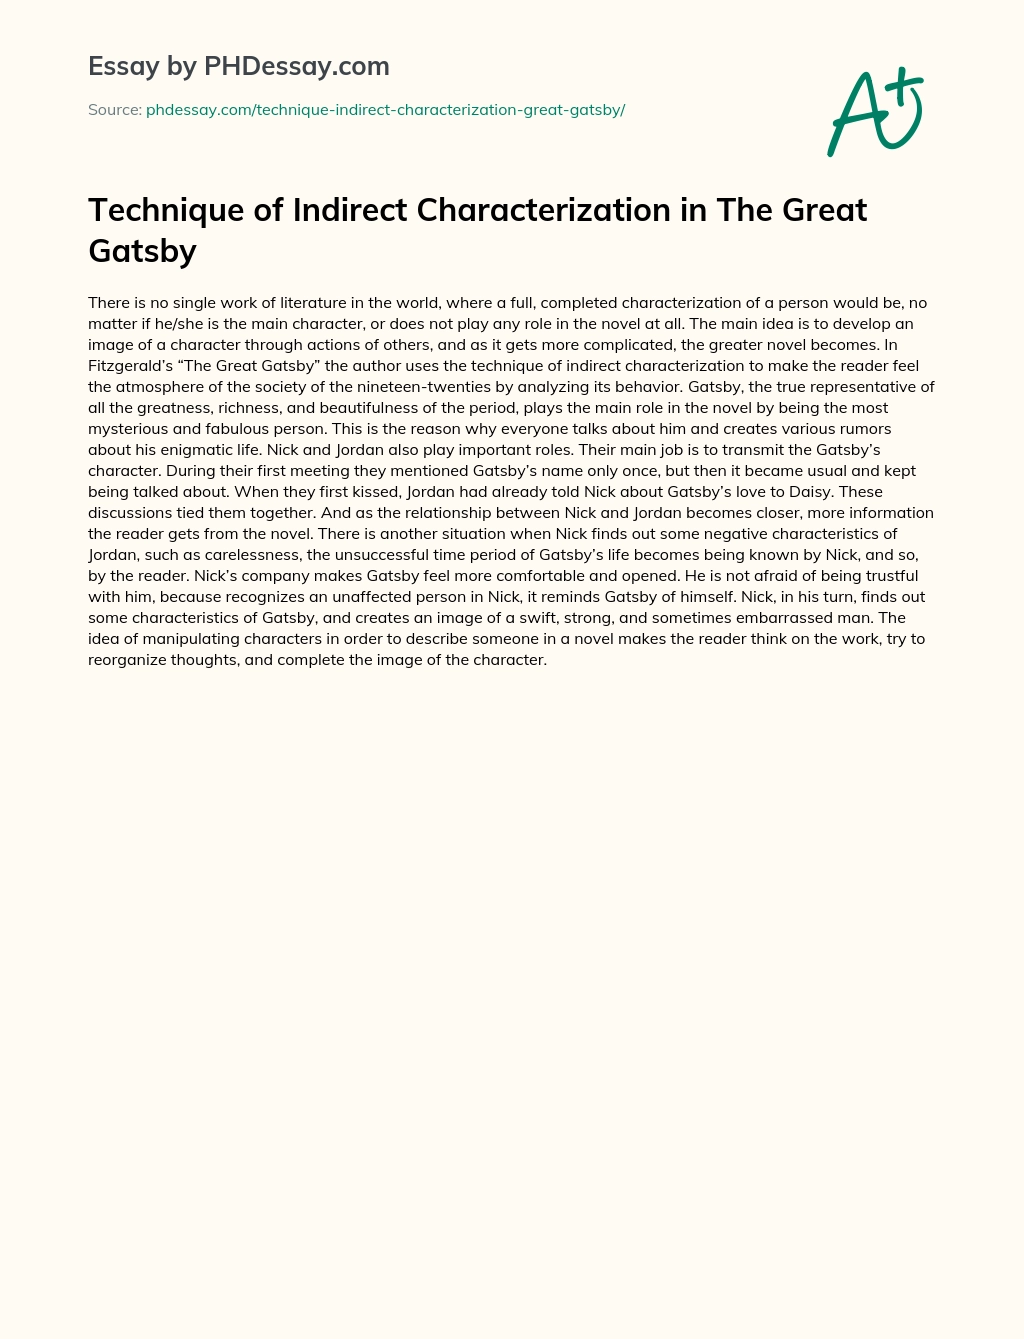 Technique of Indirect Characterization in The Great Gatsby essay